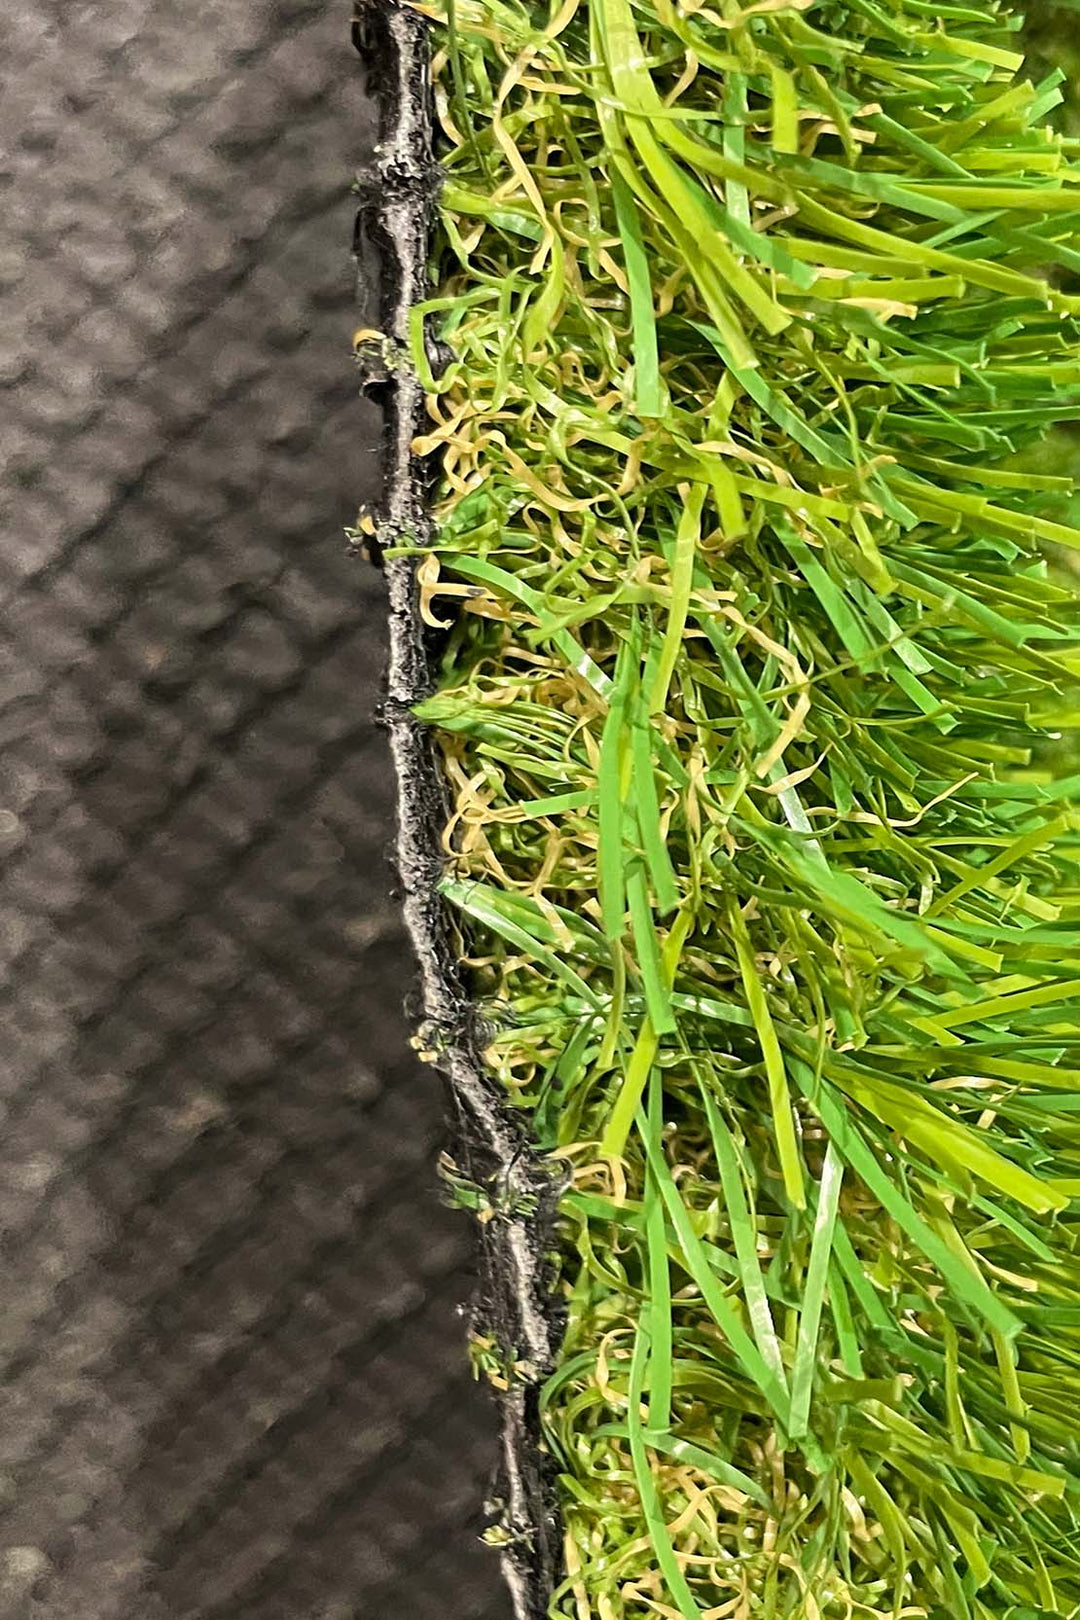 40 MM Luxer Artificial Grass for Indoor and Outdoor Use, Soft and Lush Natural Looking - V Surfaces